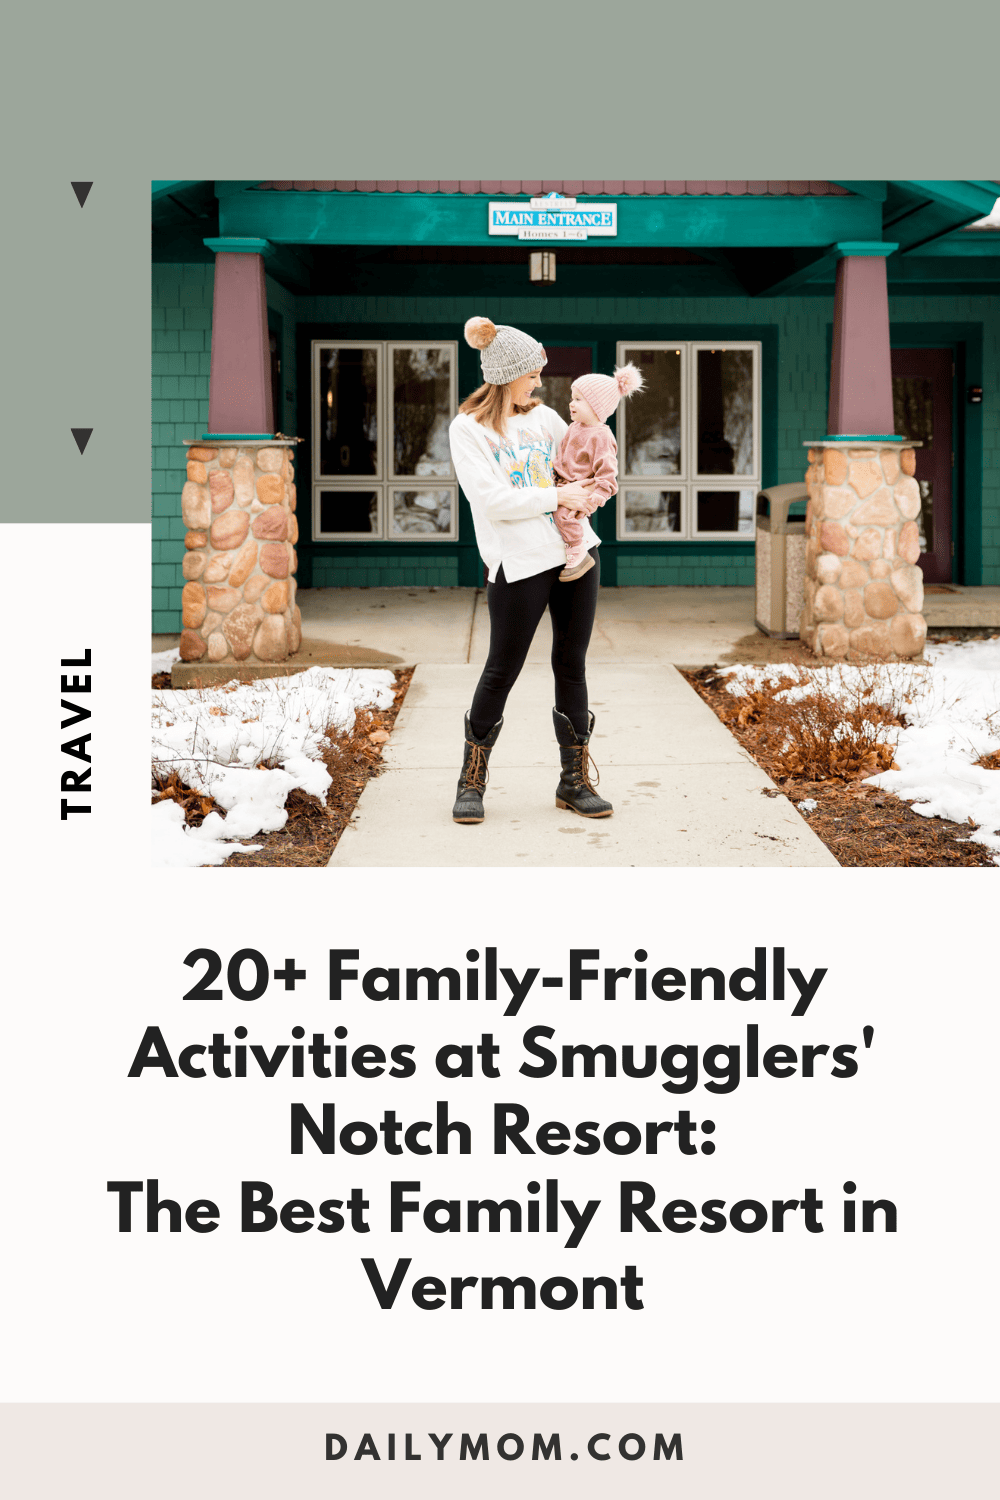 20+ Family-Friendly Activities At Smugglers' Notch Resort: The Best Family Resort In Vermont 37 Daily Mom, Magazine For Families